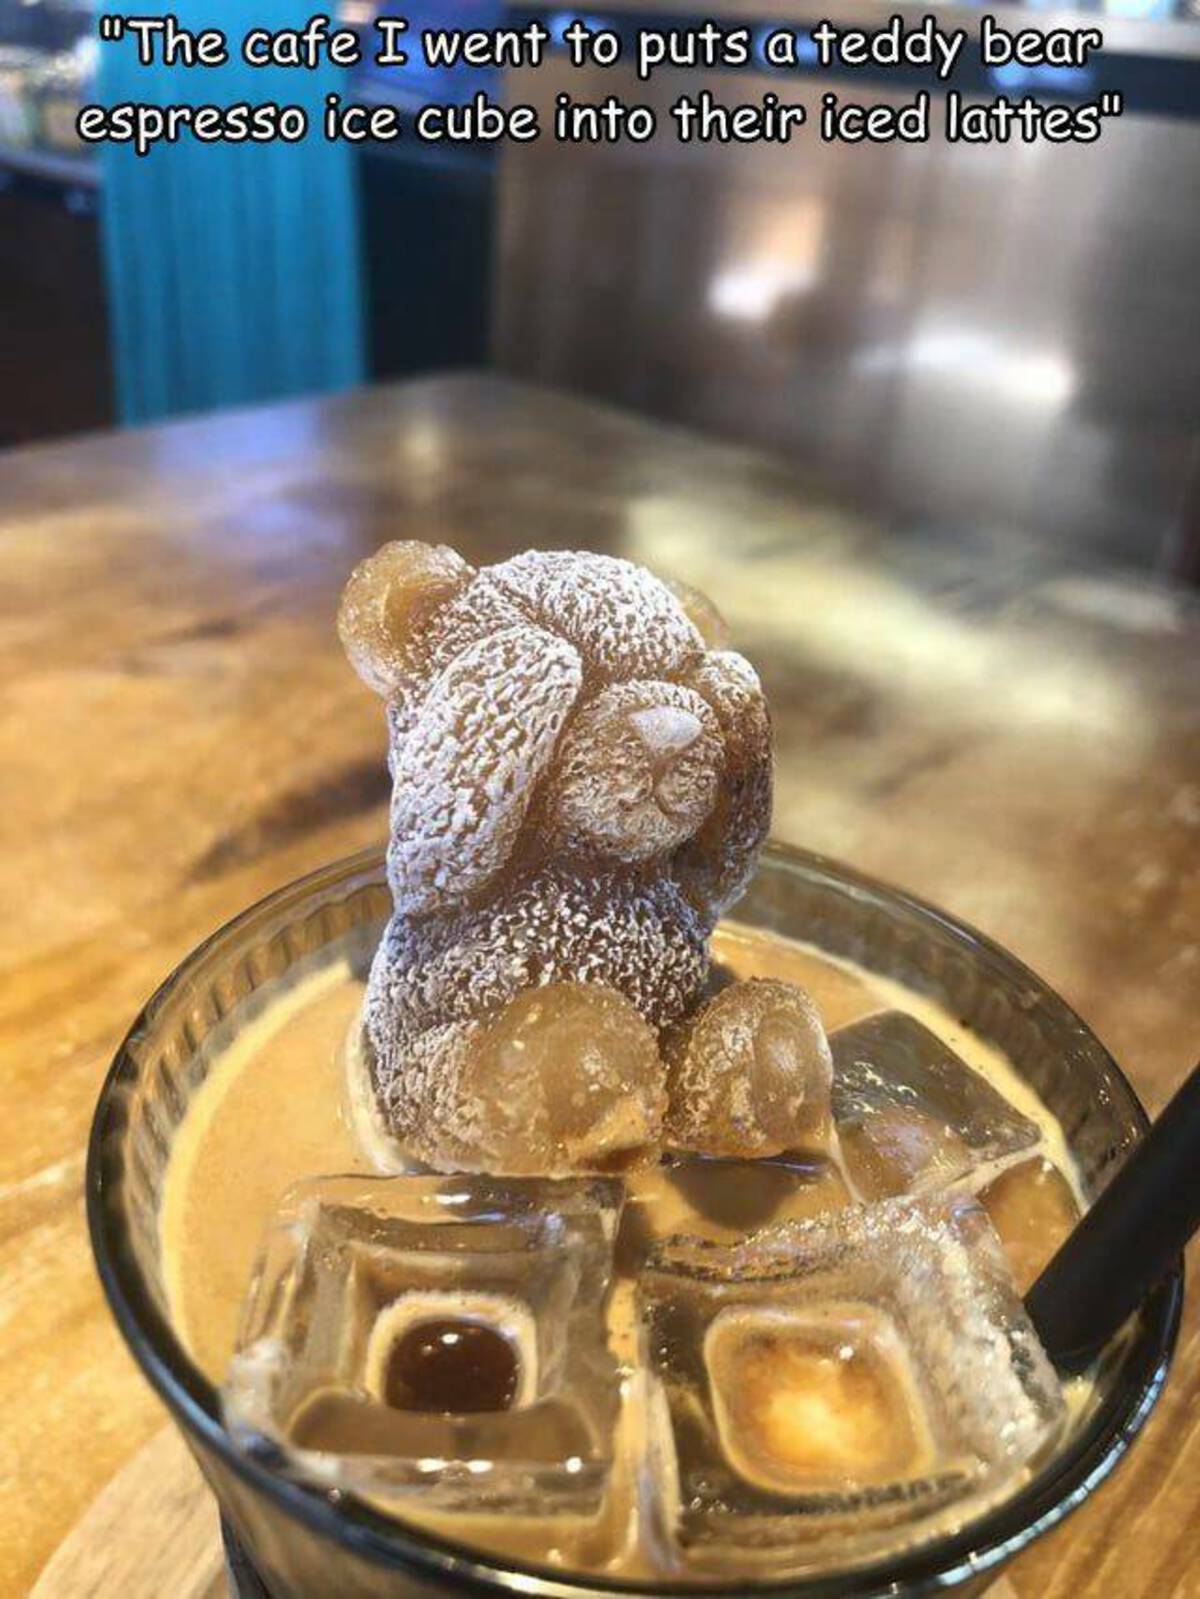 dish - "The cafe I went to puts a teddy bear espresso ice cube into their iced lattes"